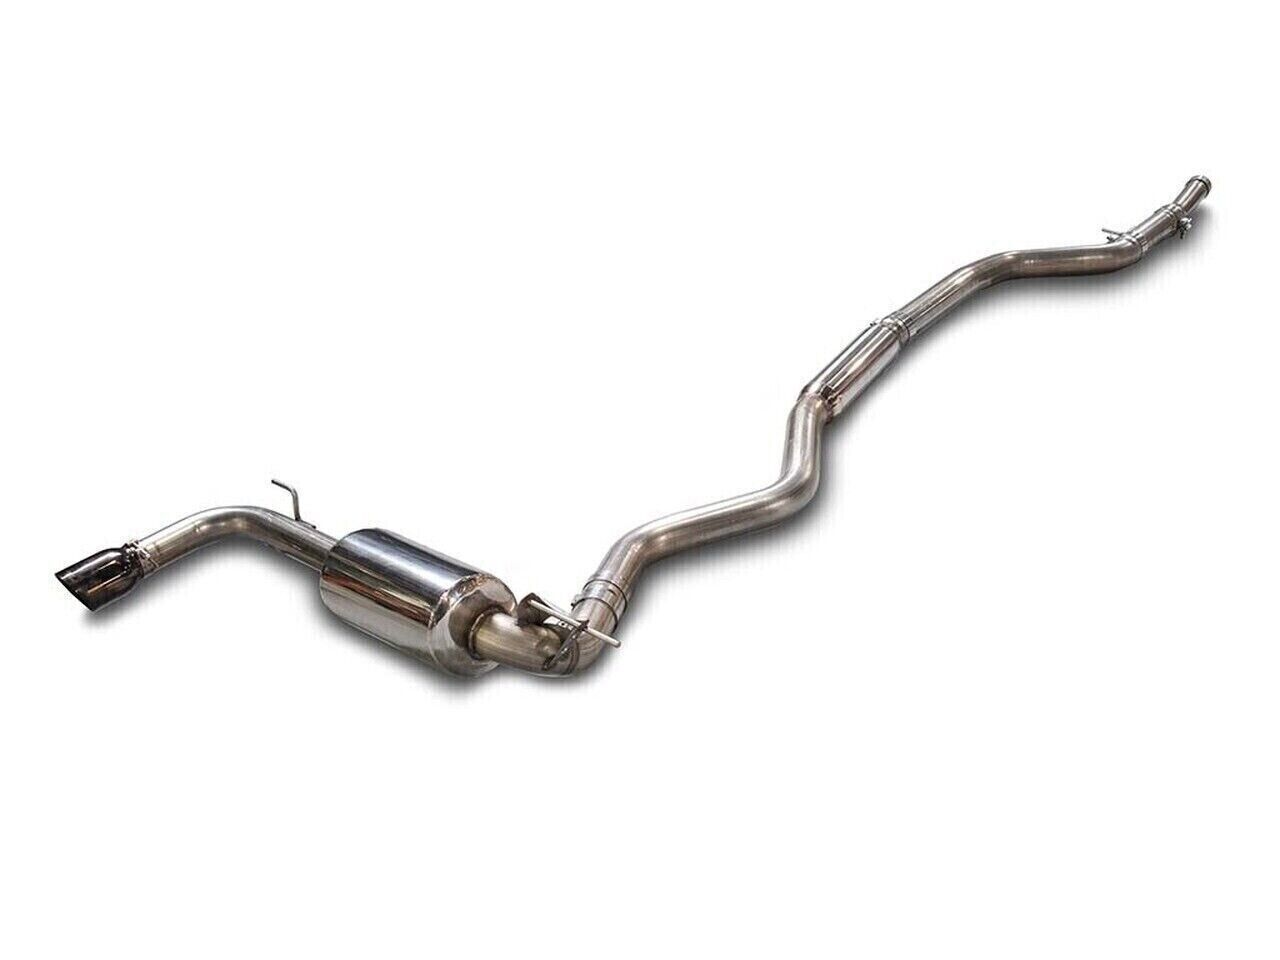 AWE 3015-23036 Tuning for BMW F30 320i Touring Exhaust w/Mid Pipe-Black Tip